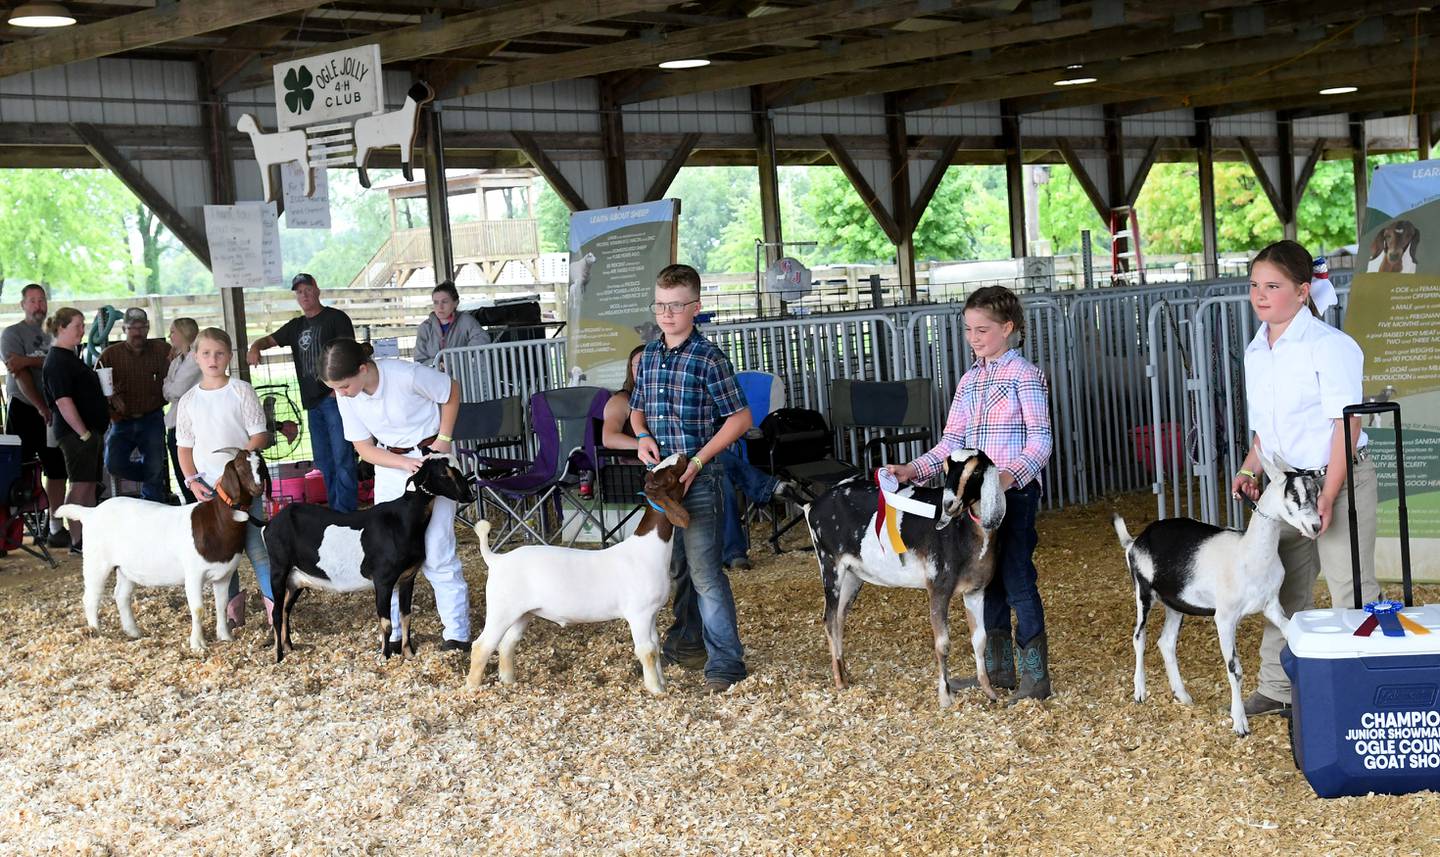 Kids show their goats in the Junior Show at the Ogle County 4-H Fair on Sunday, Aug. 7, 2022. The goat show was the only event not cancelled on Sunday after nearly 3 inches of rain fell in the area early Sunday morning.